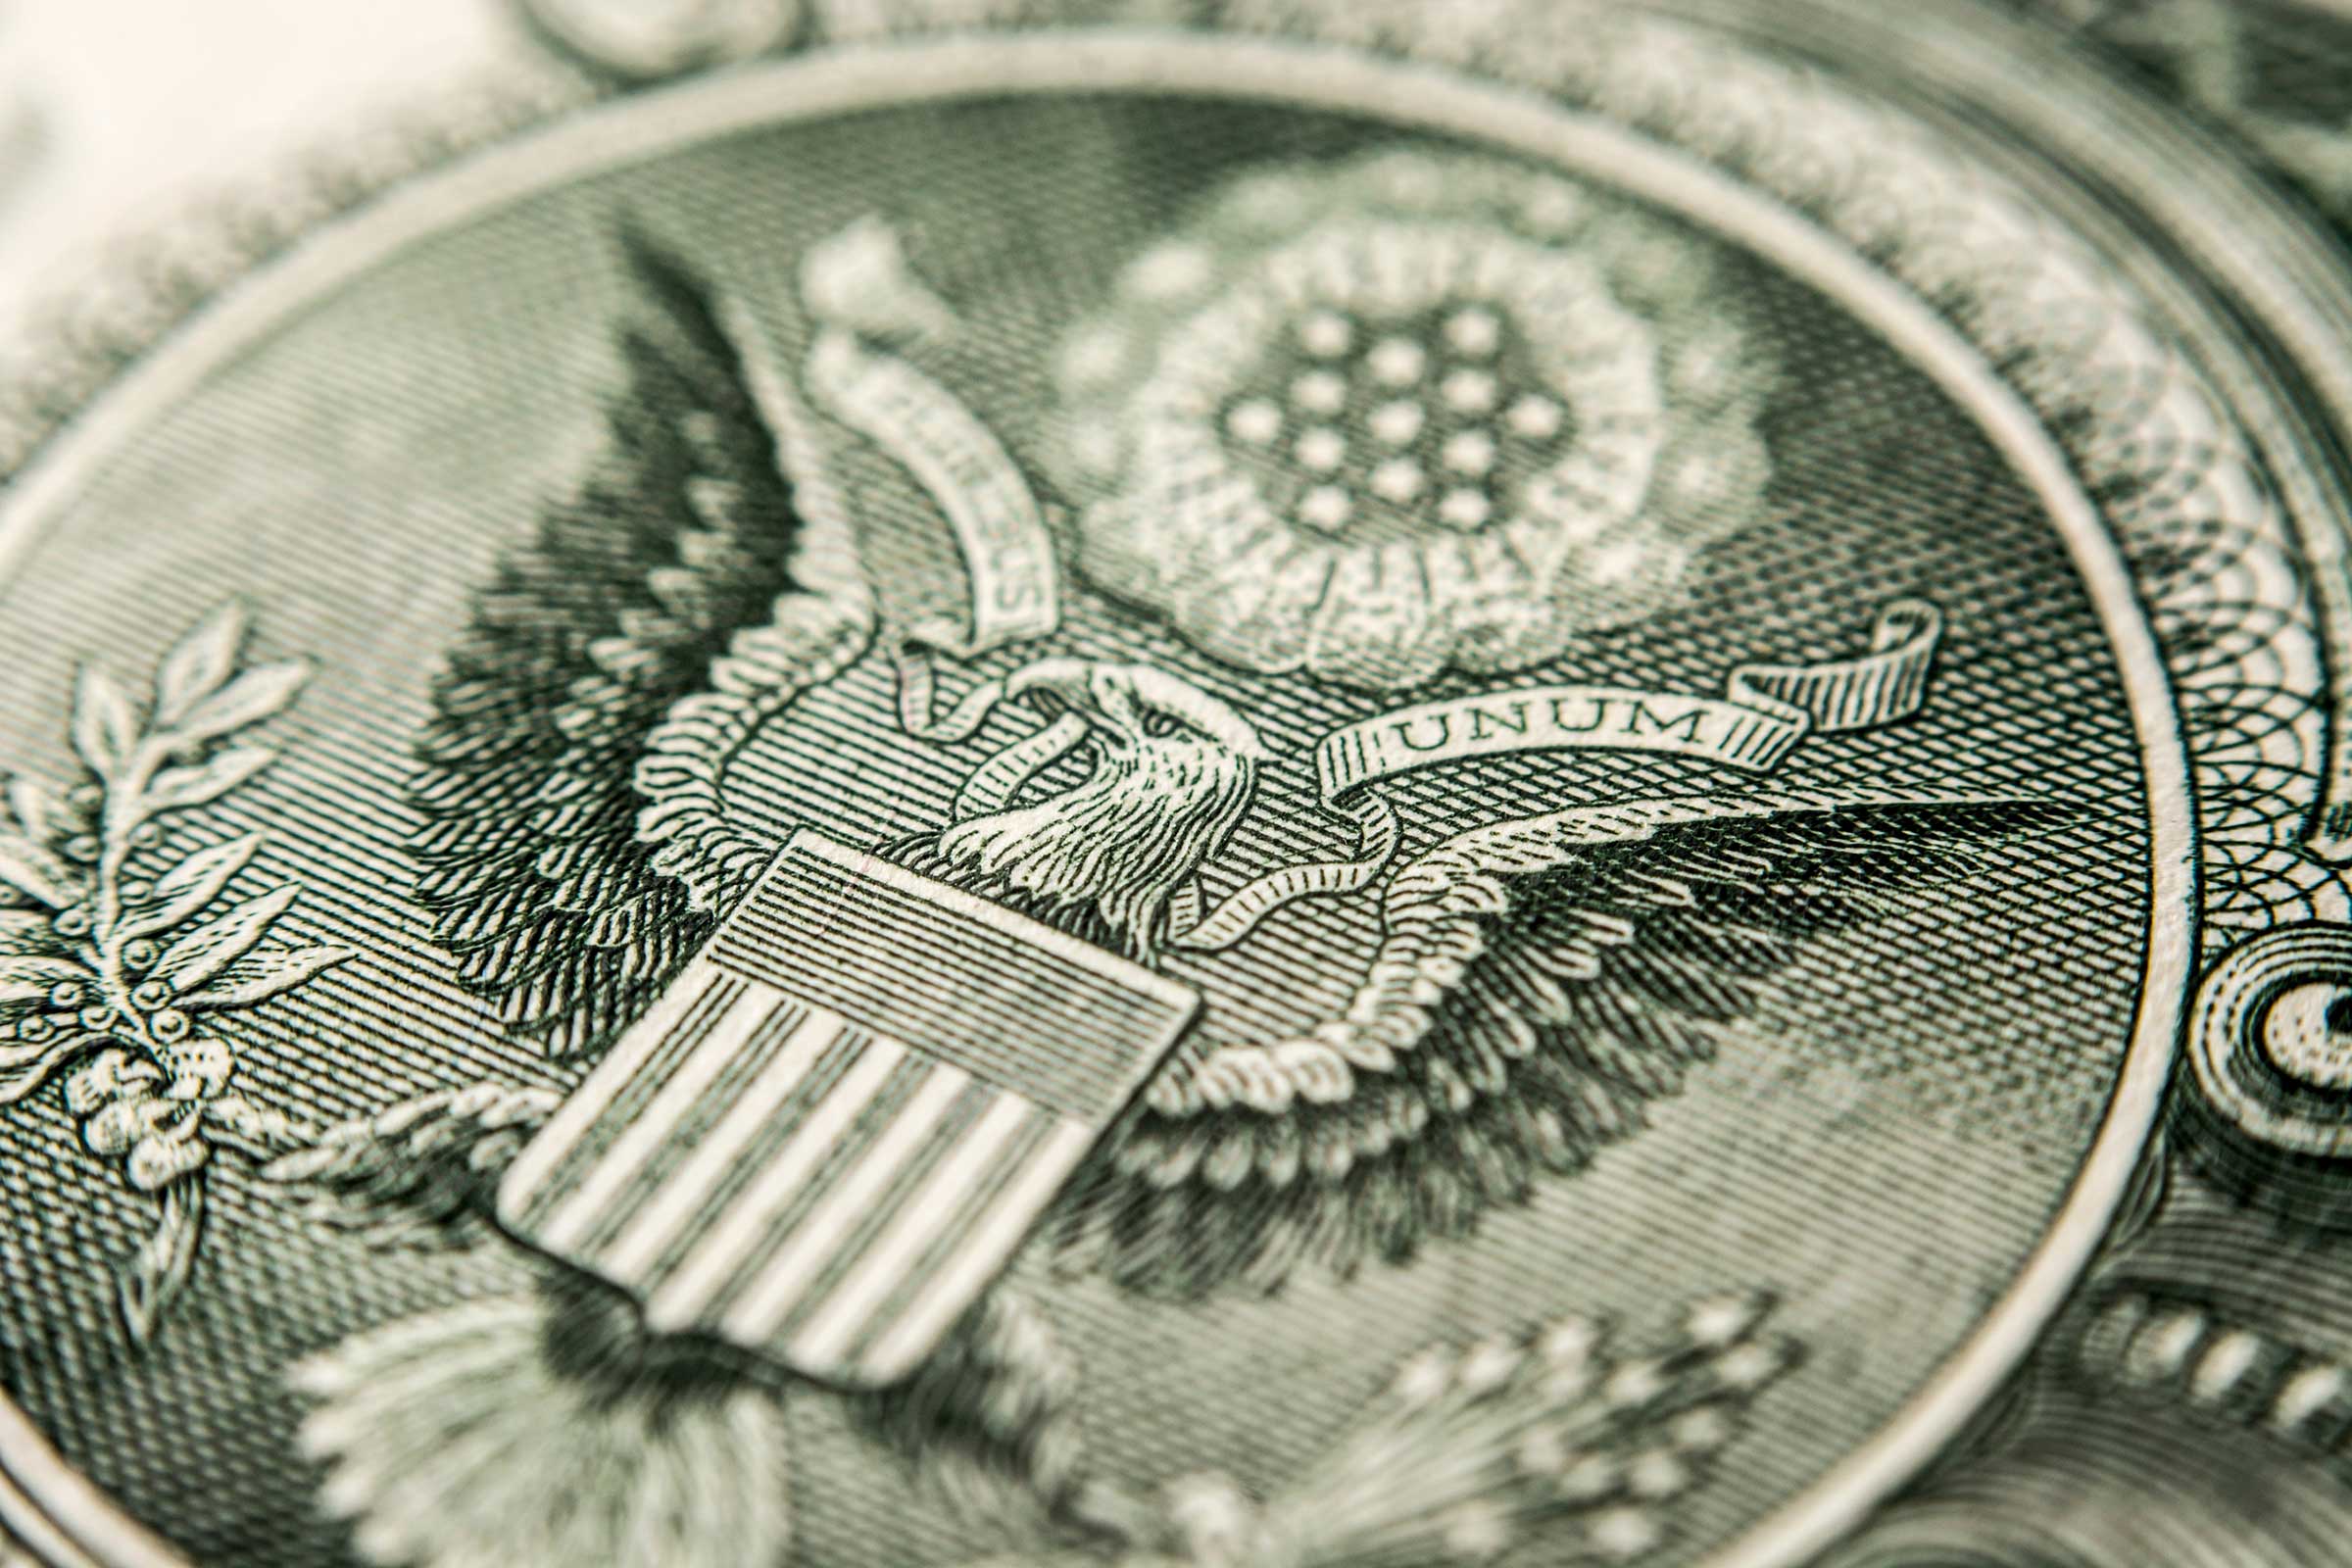 Dollar Bill Symbols: What They Mean | Reader's Digest